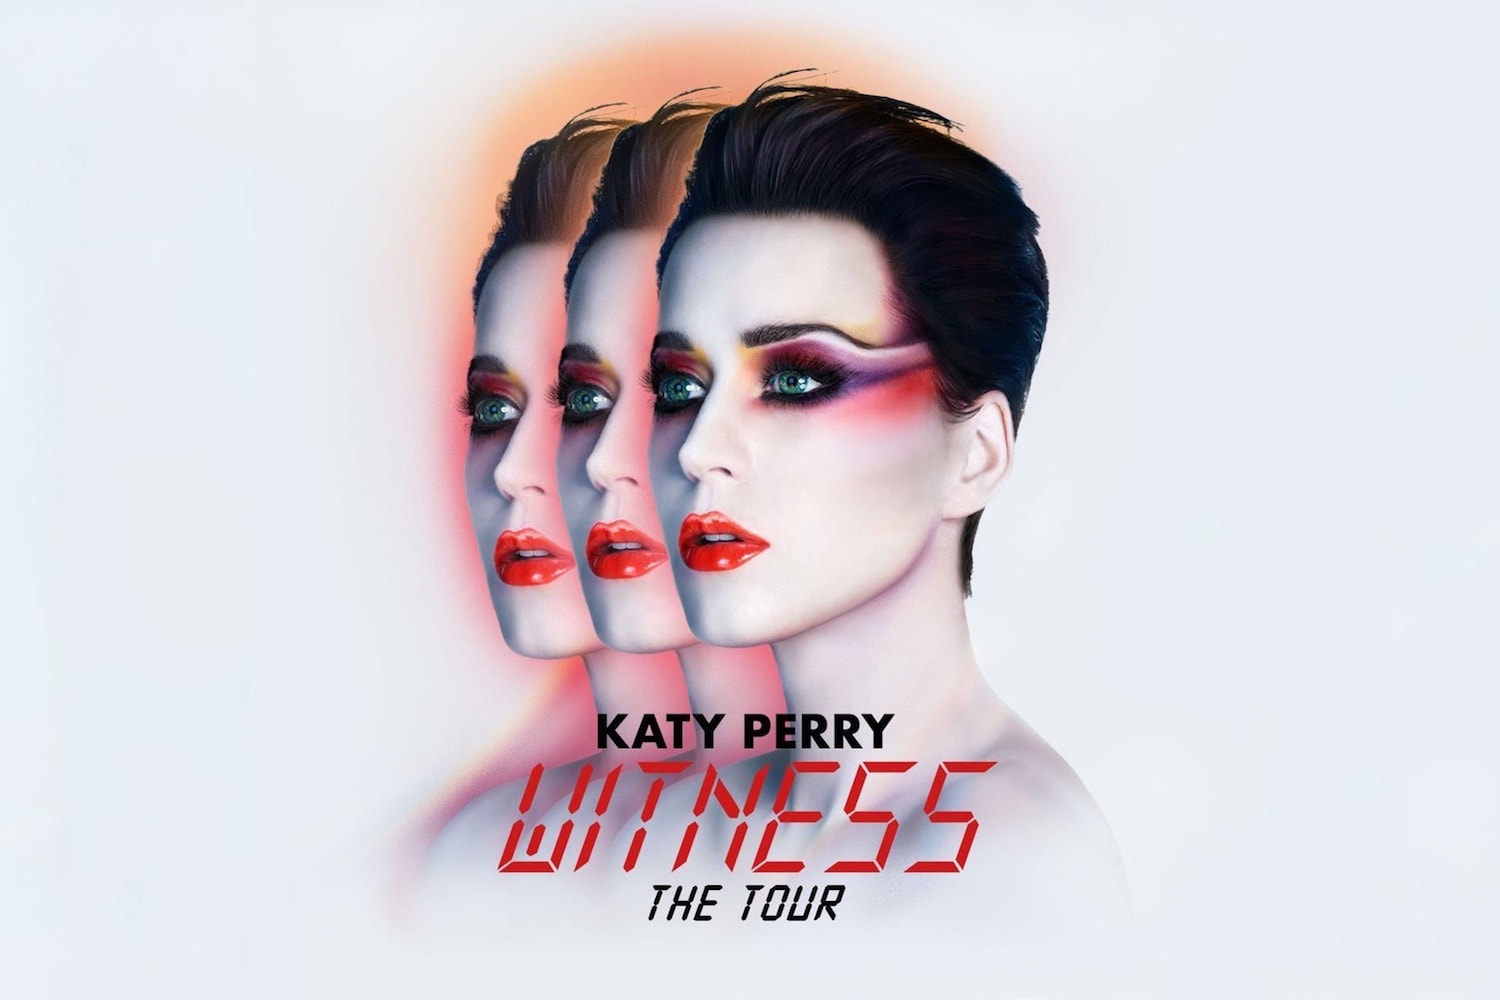 Katy Perry just announced her new album’s release date and world tour project